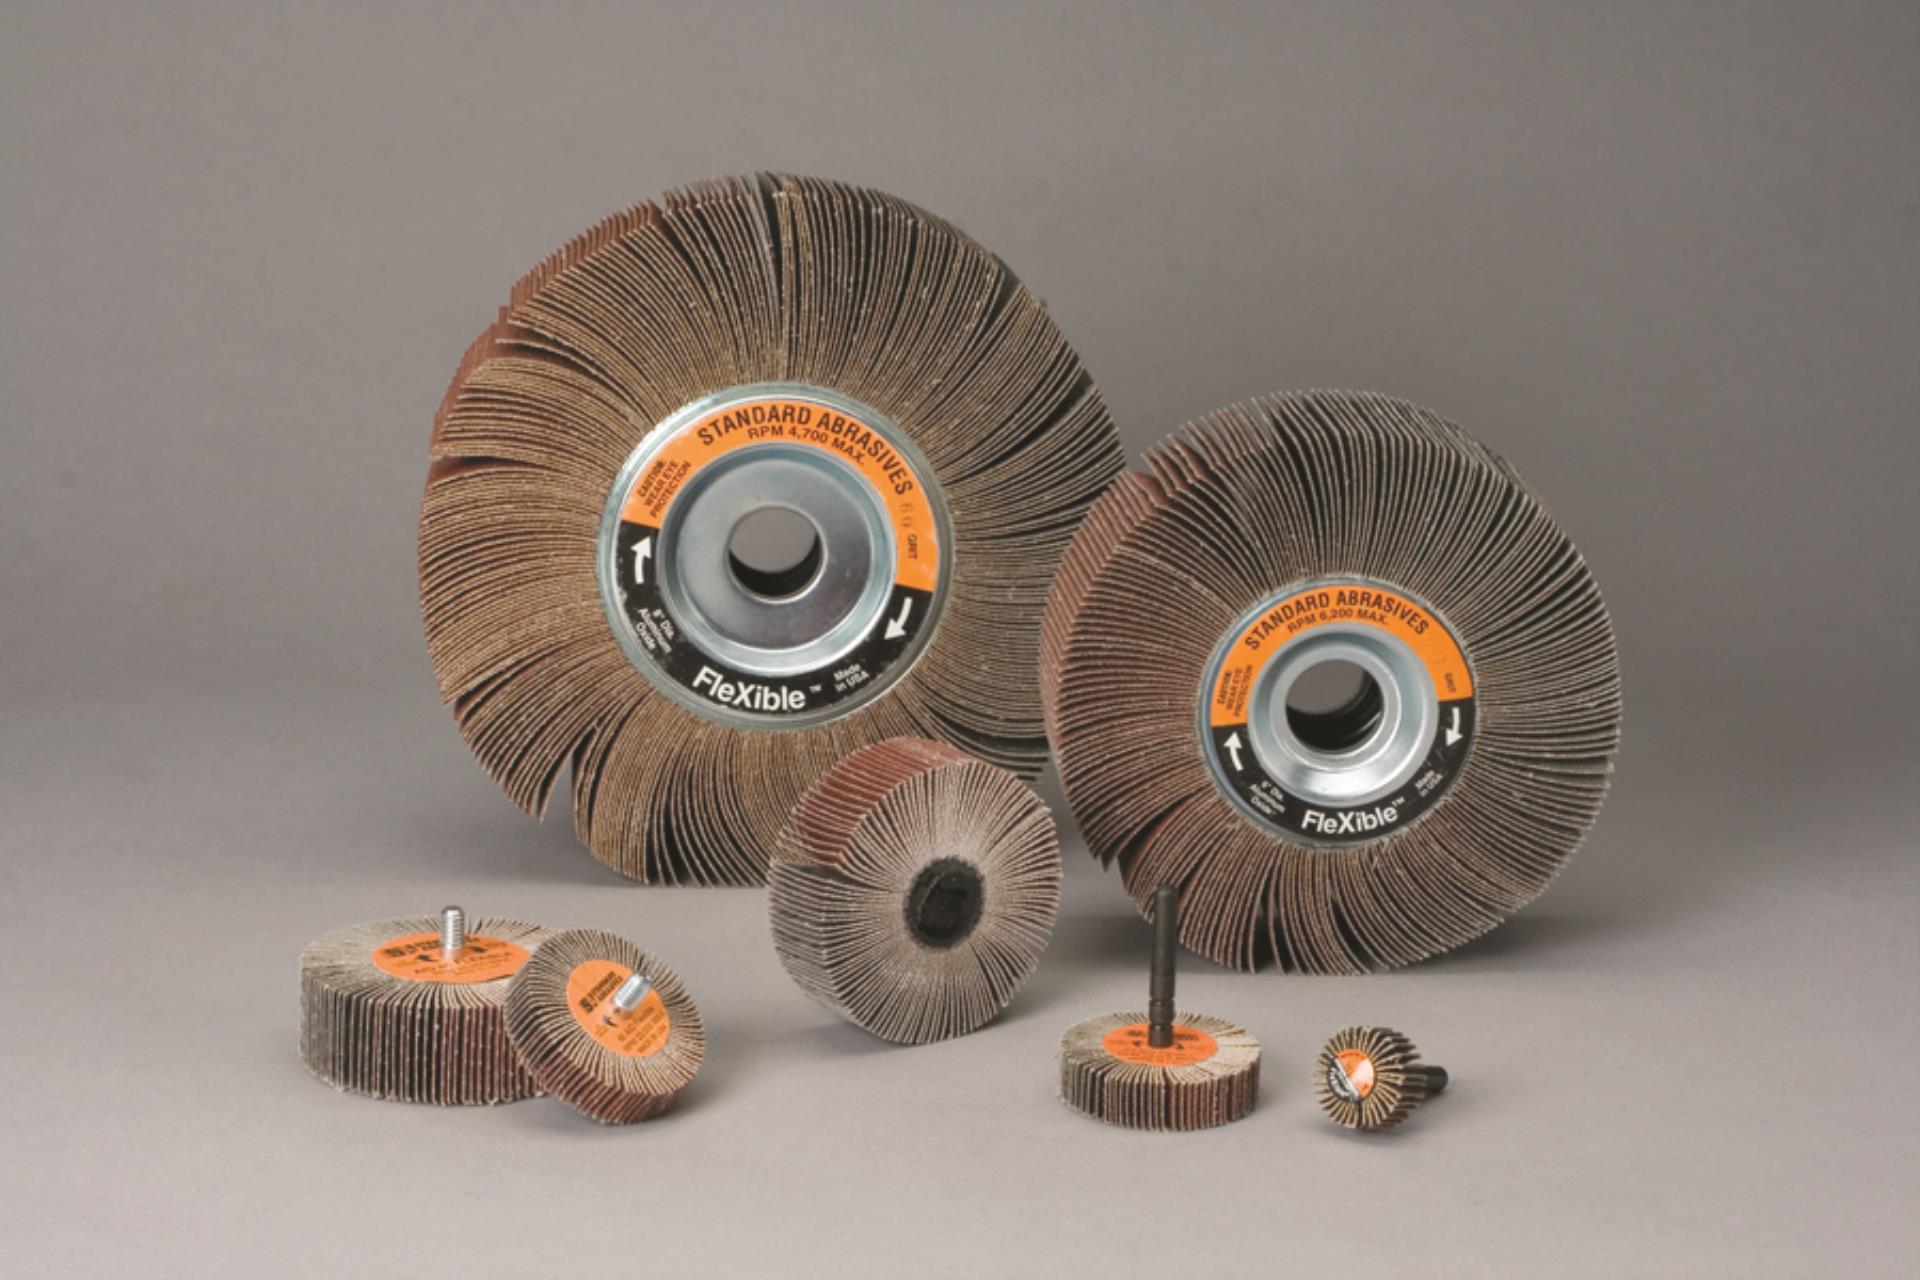 00051115427800 Standard Abrasives™ A/O Flexible Flap Wheel 681426, in x  in x in 80, per case Aircraft products flap-wheels 9379268